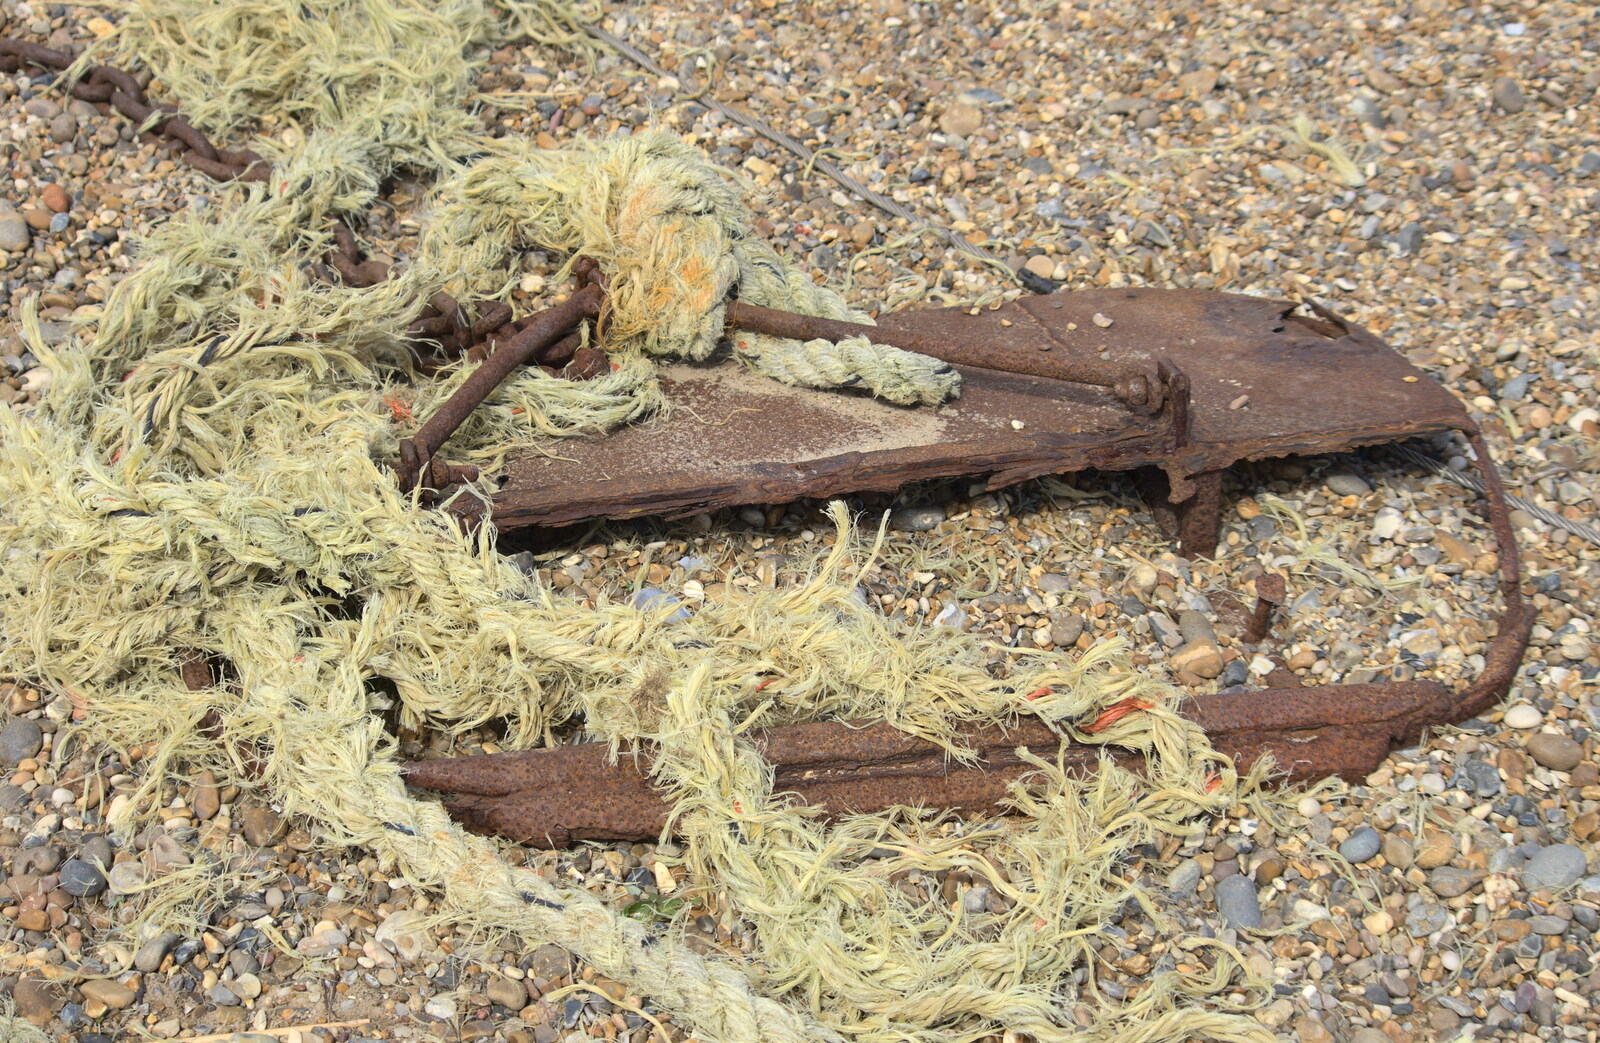 More discarded rope and rusted metalwork from A Day on the Beach, Dunwich, Suffolk - 6th April 2015